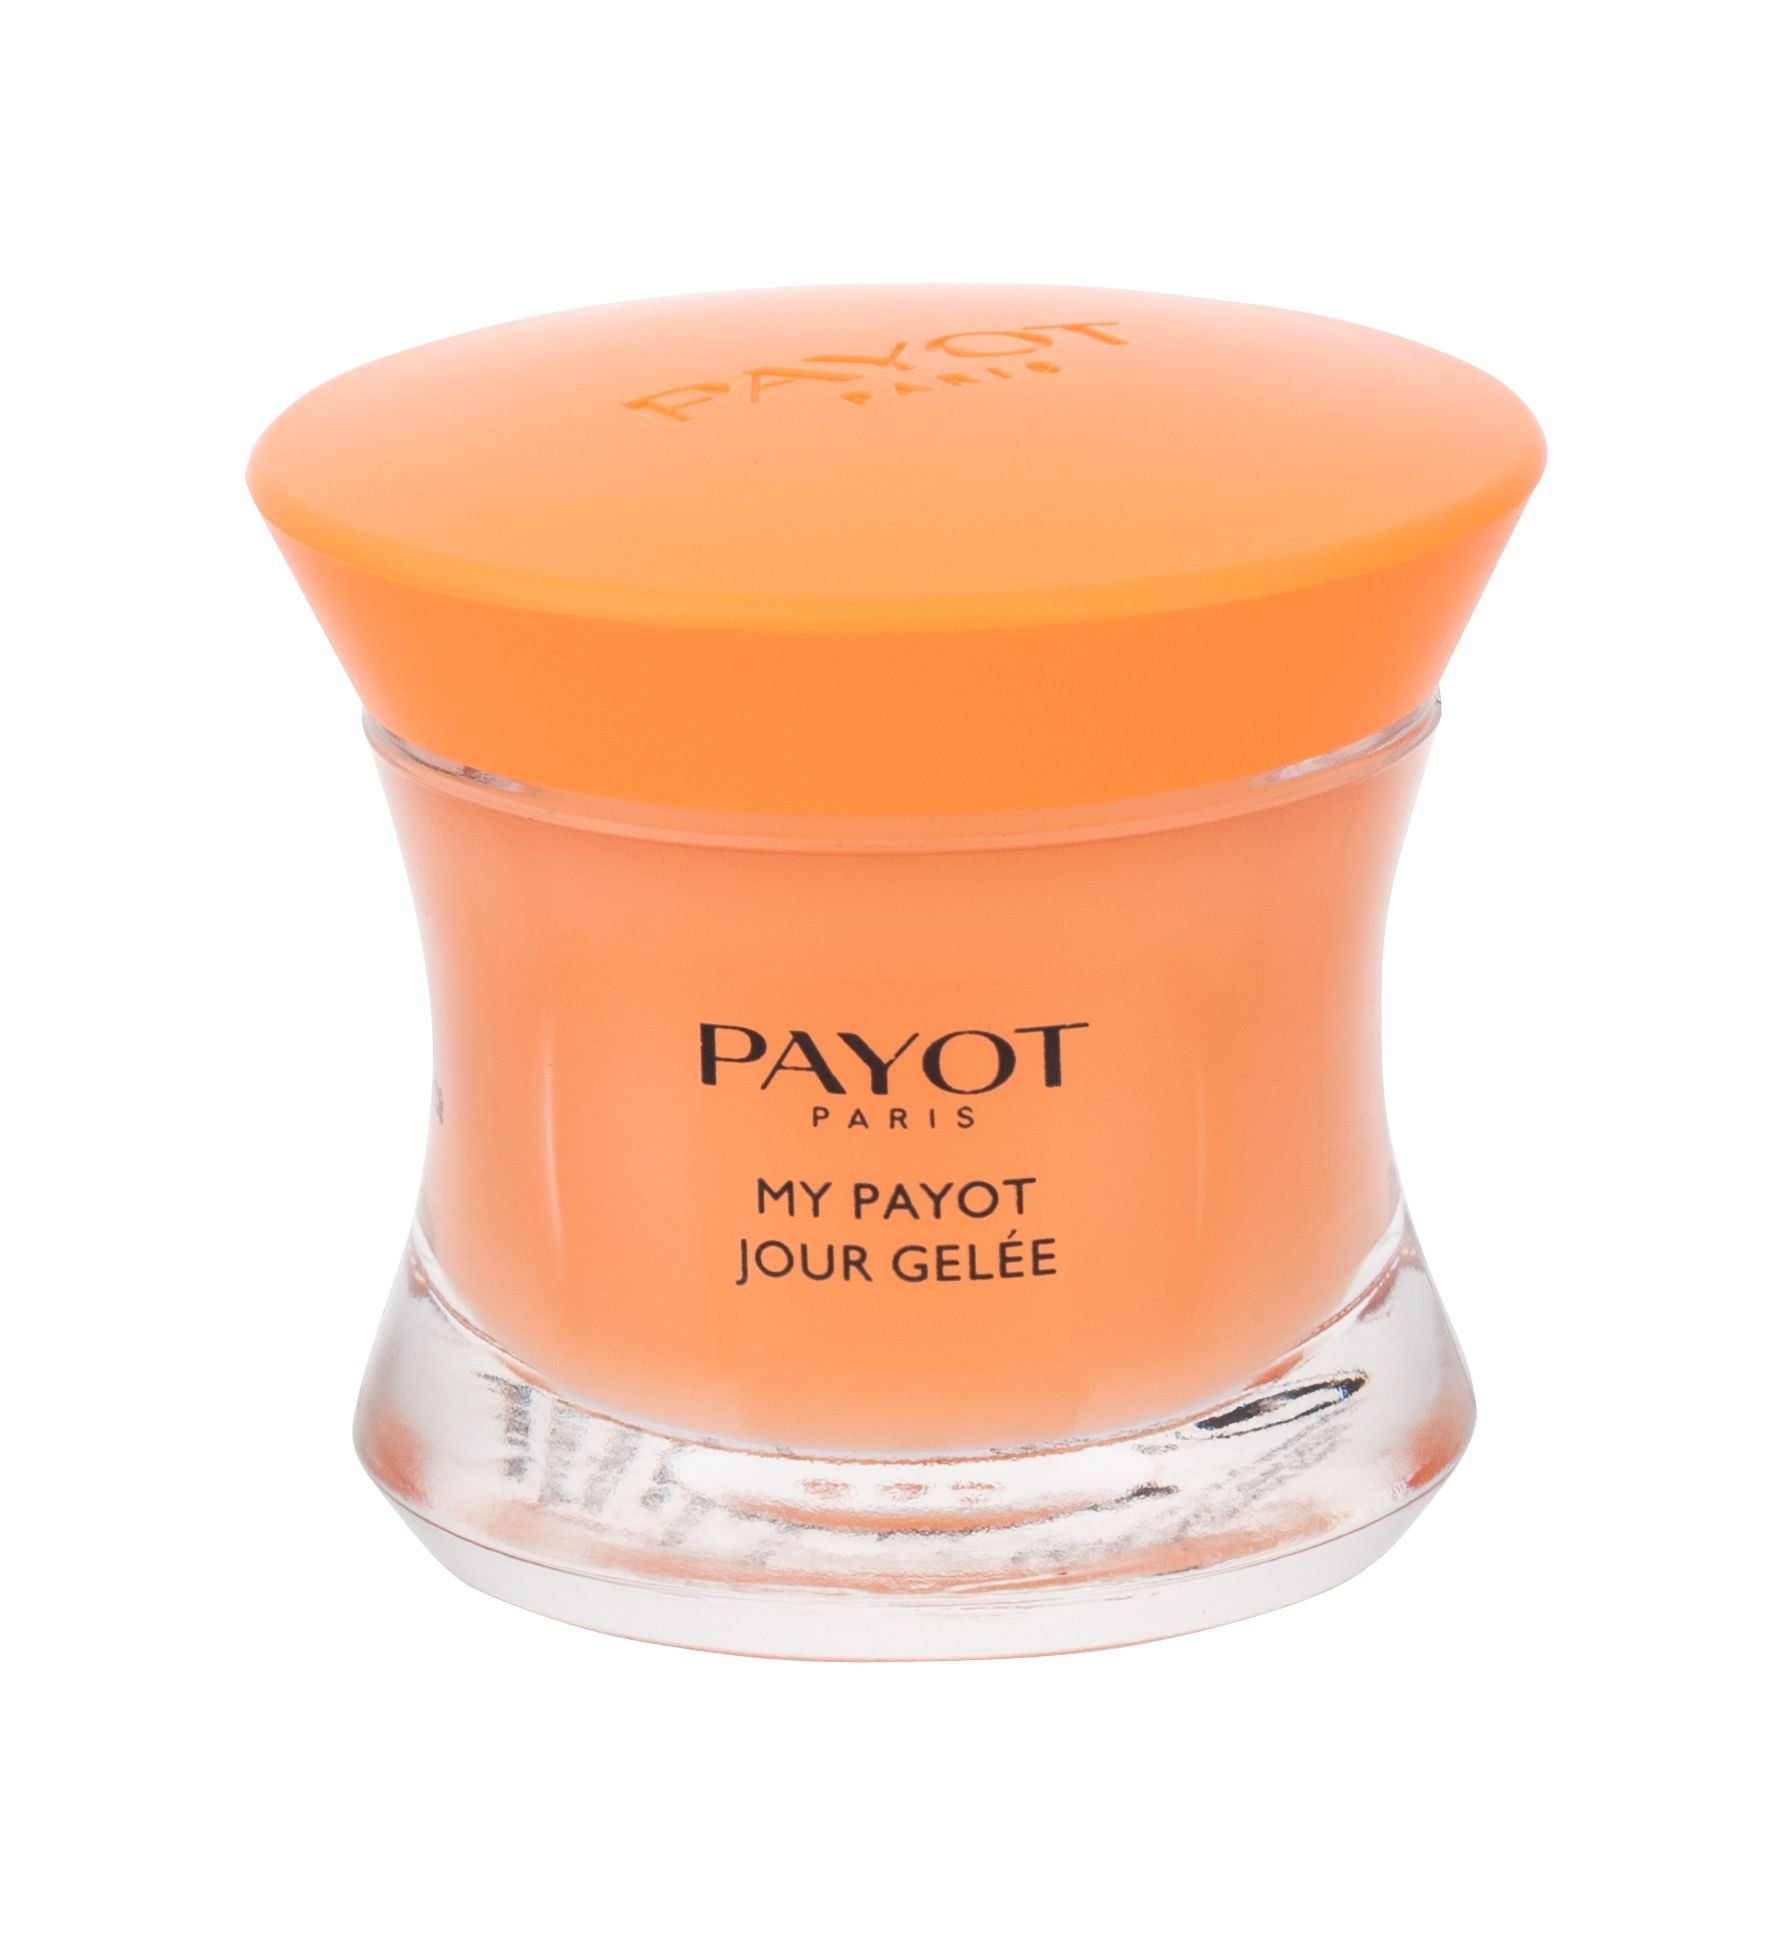 Payot My Payot Jour Gelée